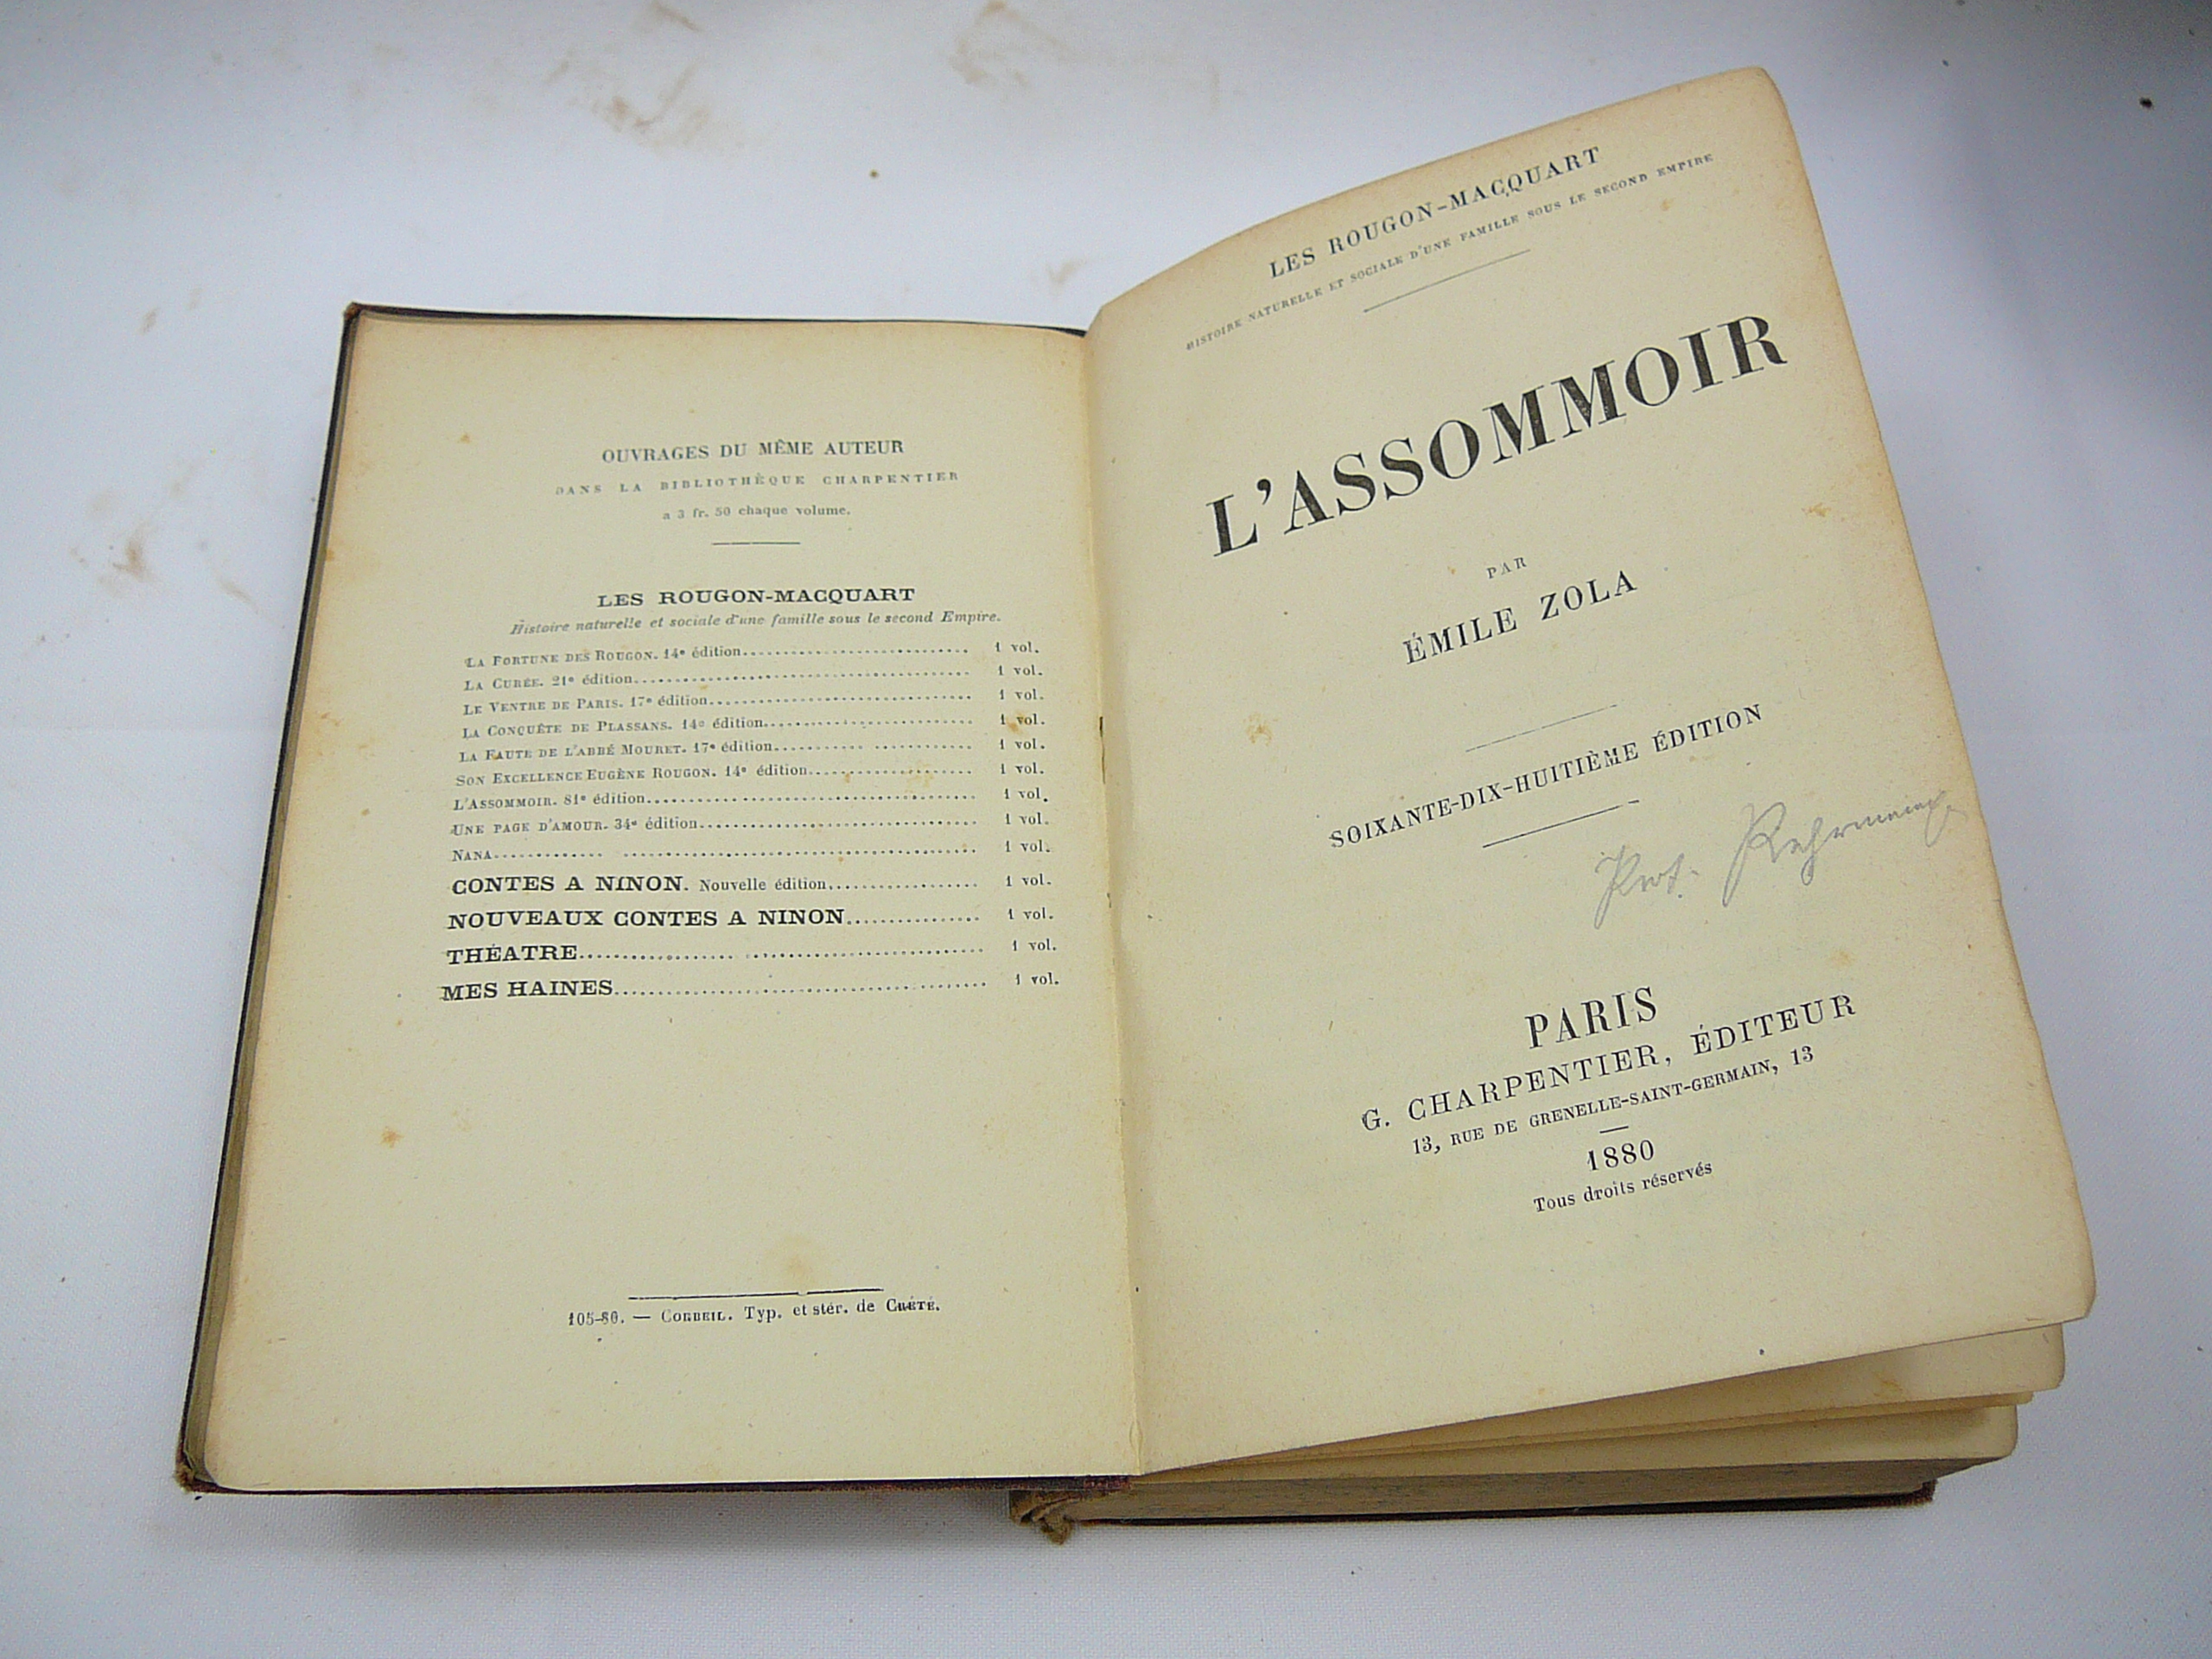 19th Century copy of L'Assommoir and 1880 copy of Nana by Emile Zola - Image 7 of 7